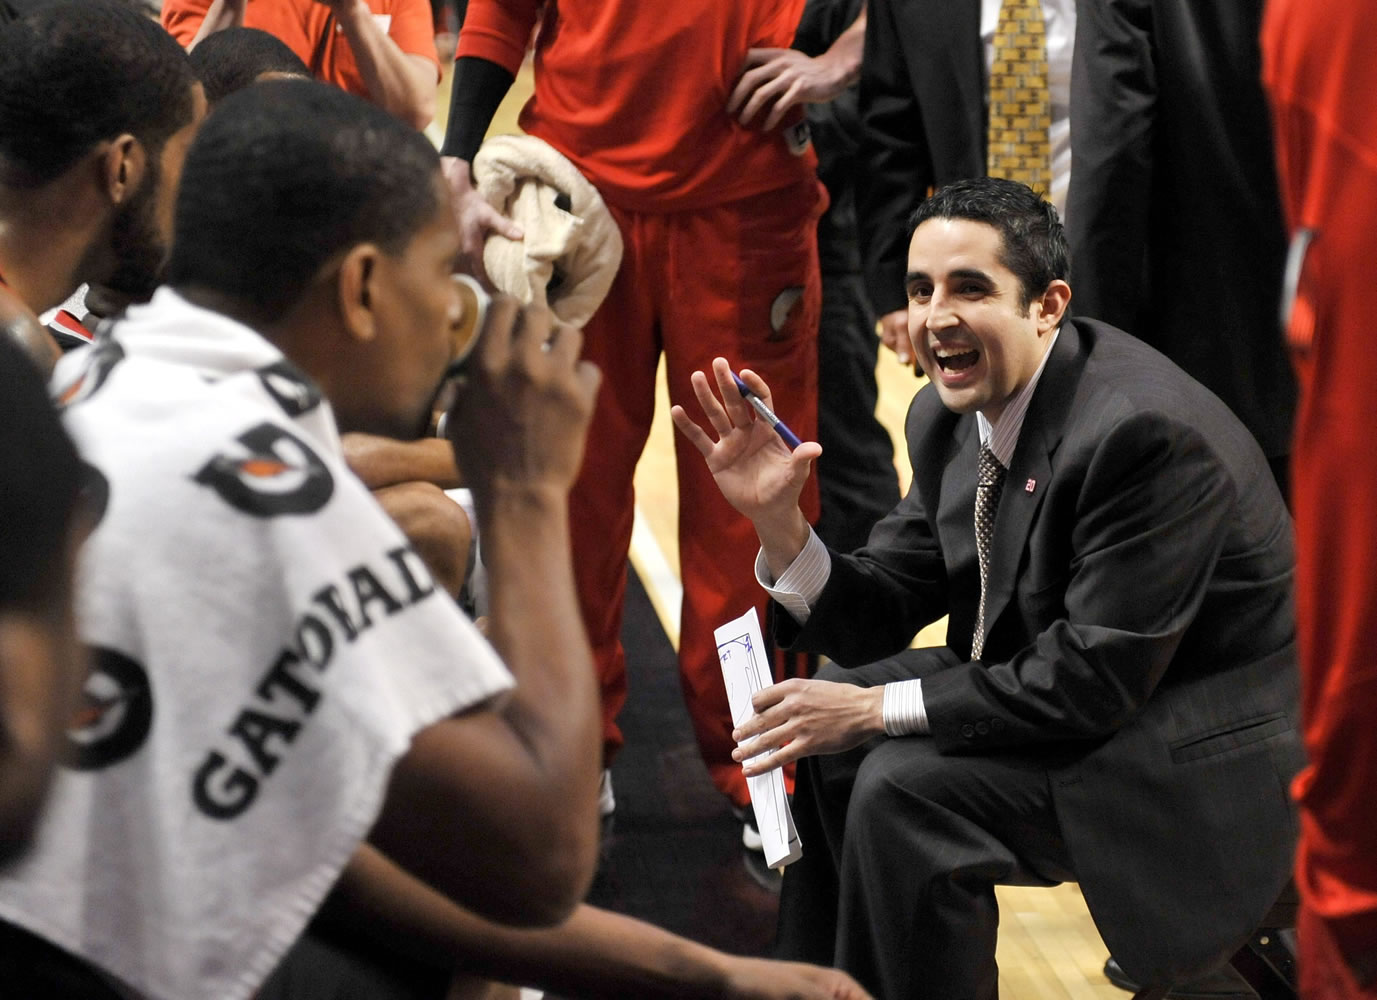 Portland Trail Blazers head coach Kaleb Canales talks to his team during a timeout in the first quarter of an NBA basketball game against the Chicago Bulls, Friday, March 16, 2012, in Chicago.